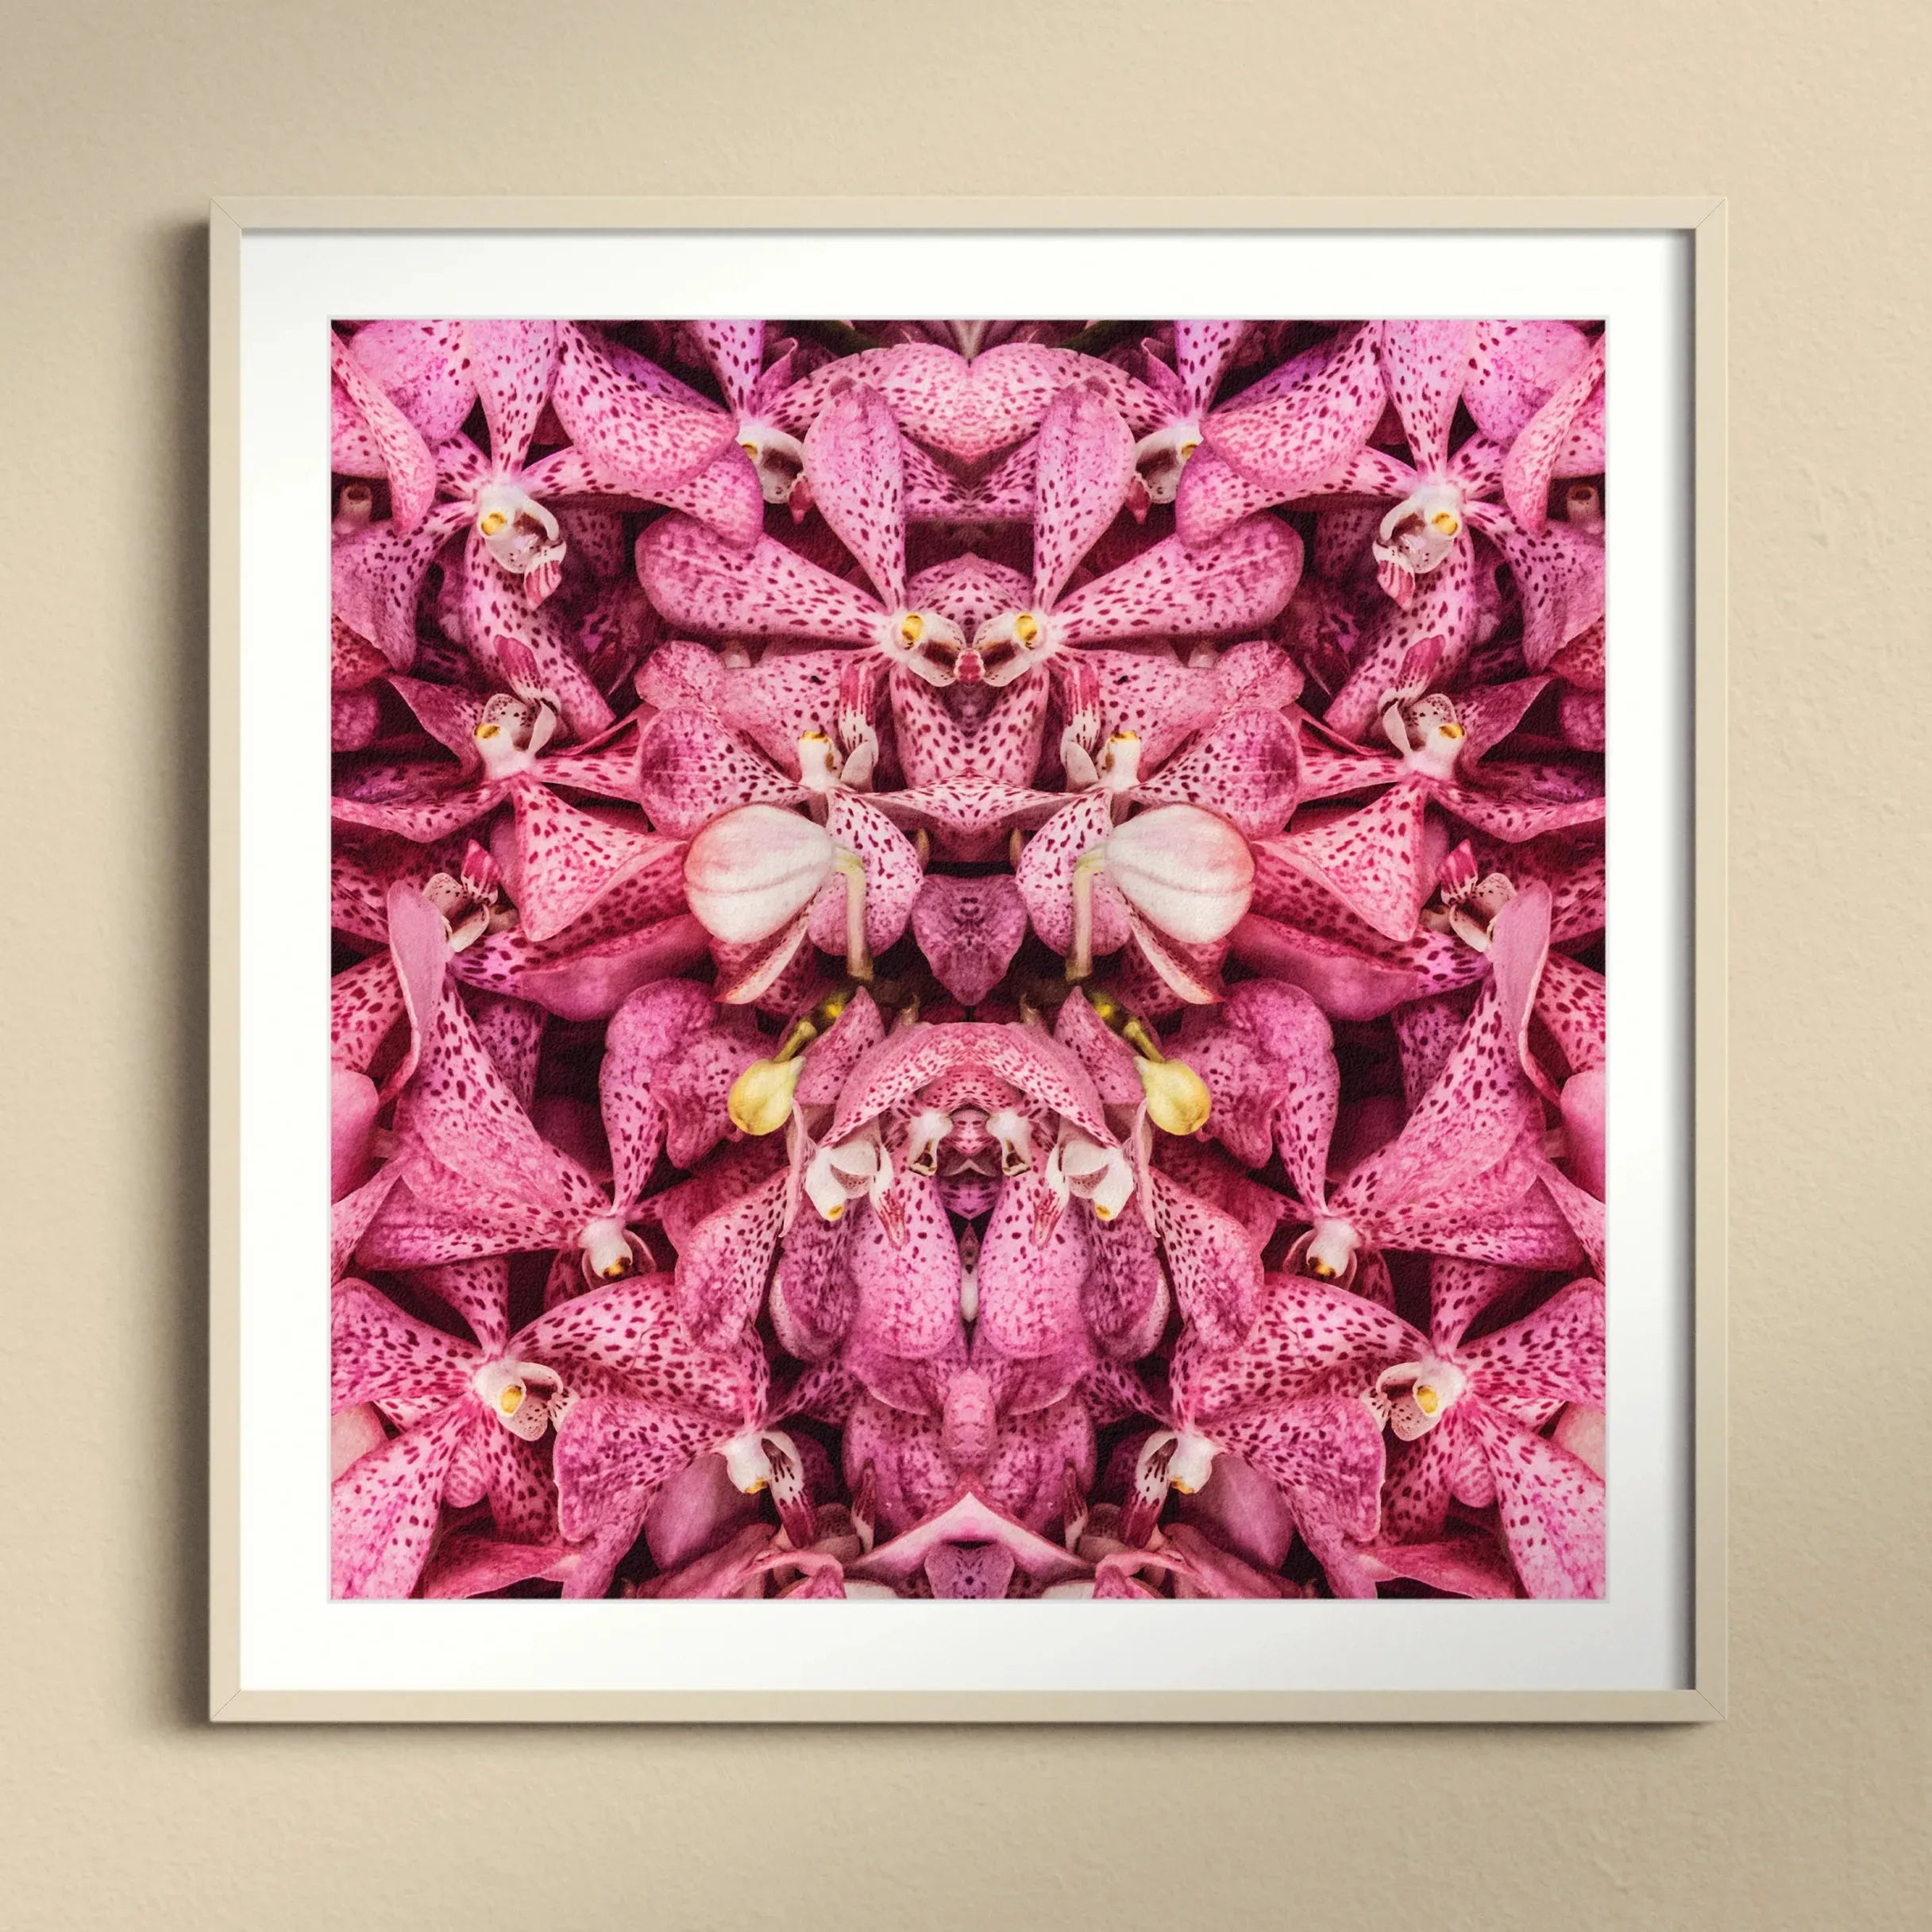 Tickled Pink Framed & Mounted Print - Posters Prints & Visual Artwork - Aesthetic Art